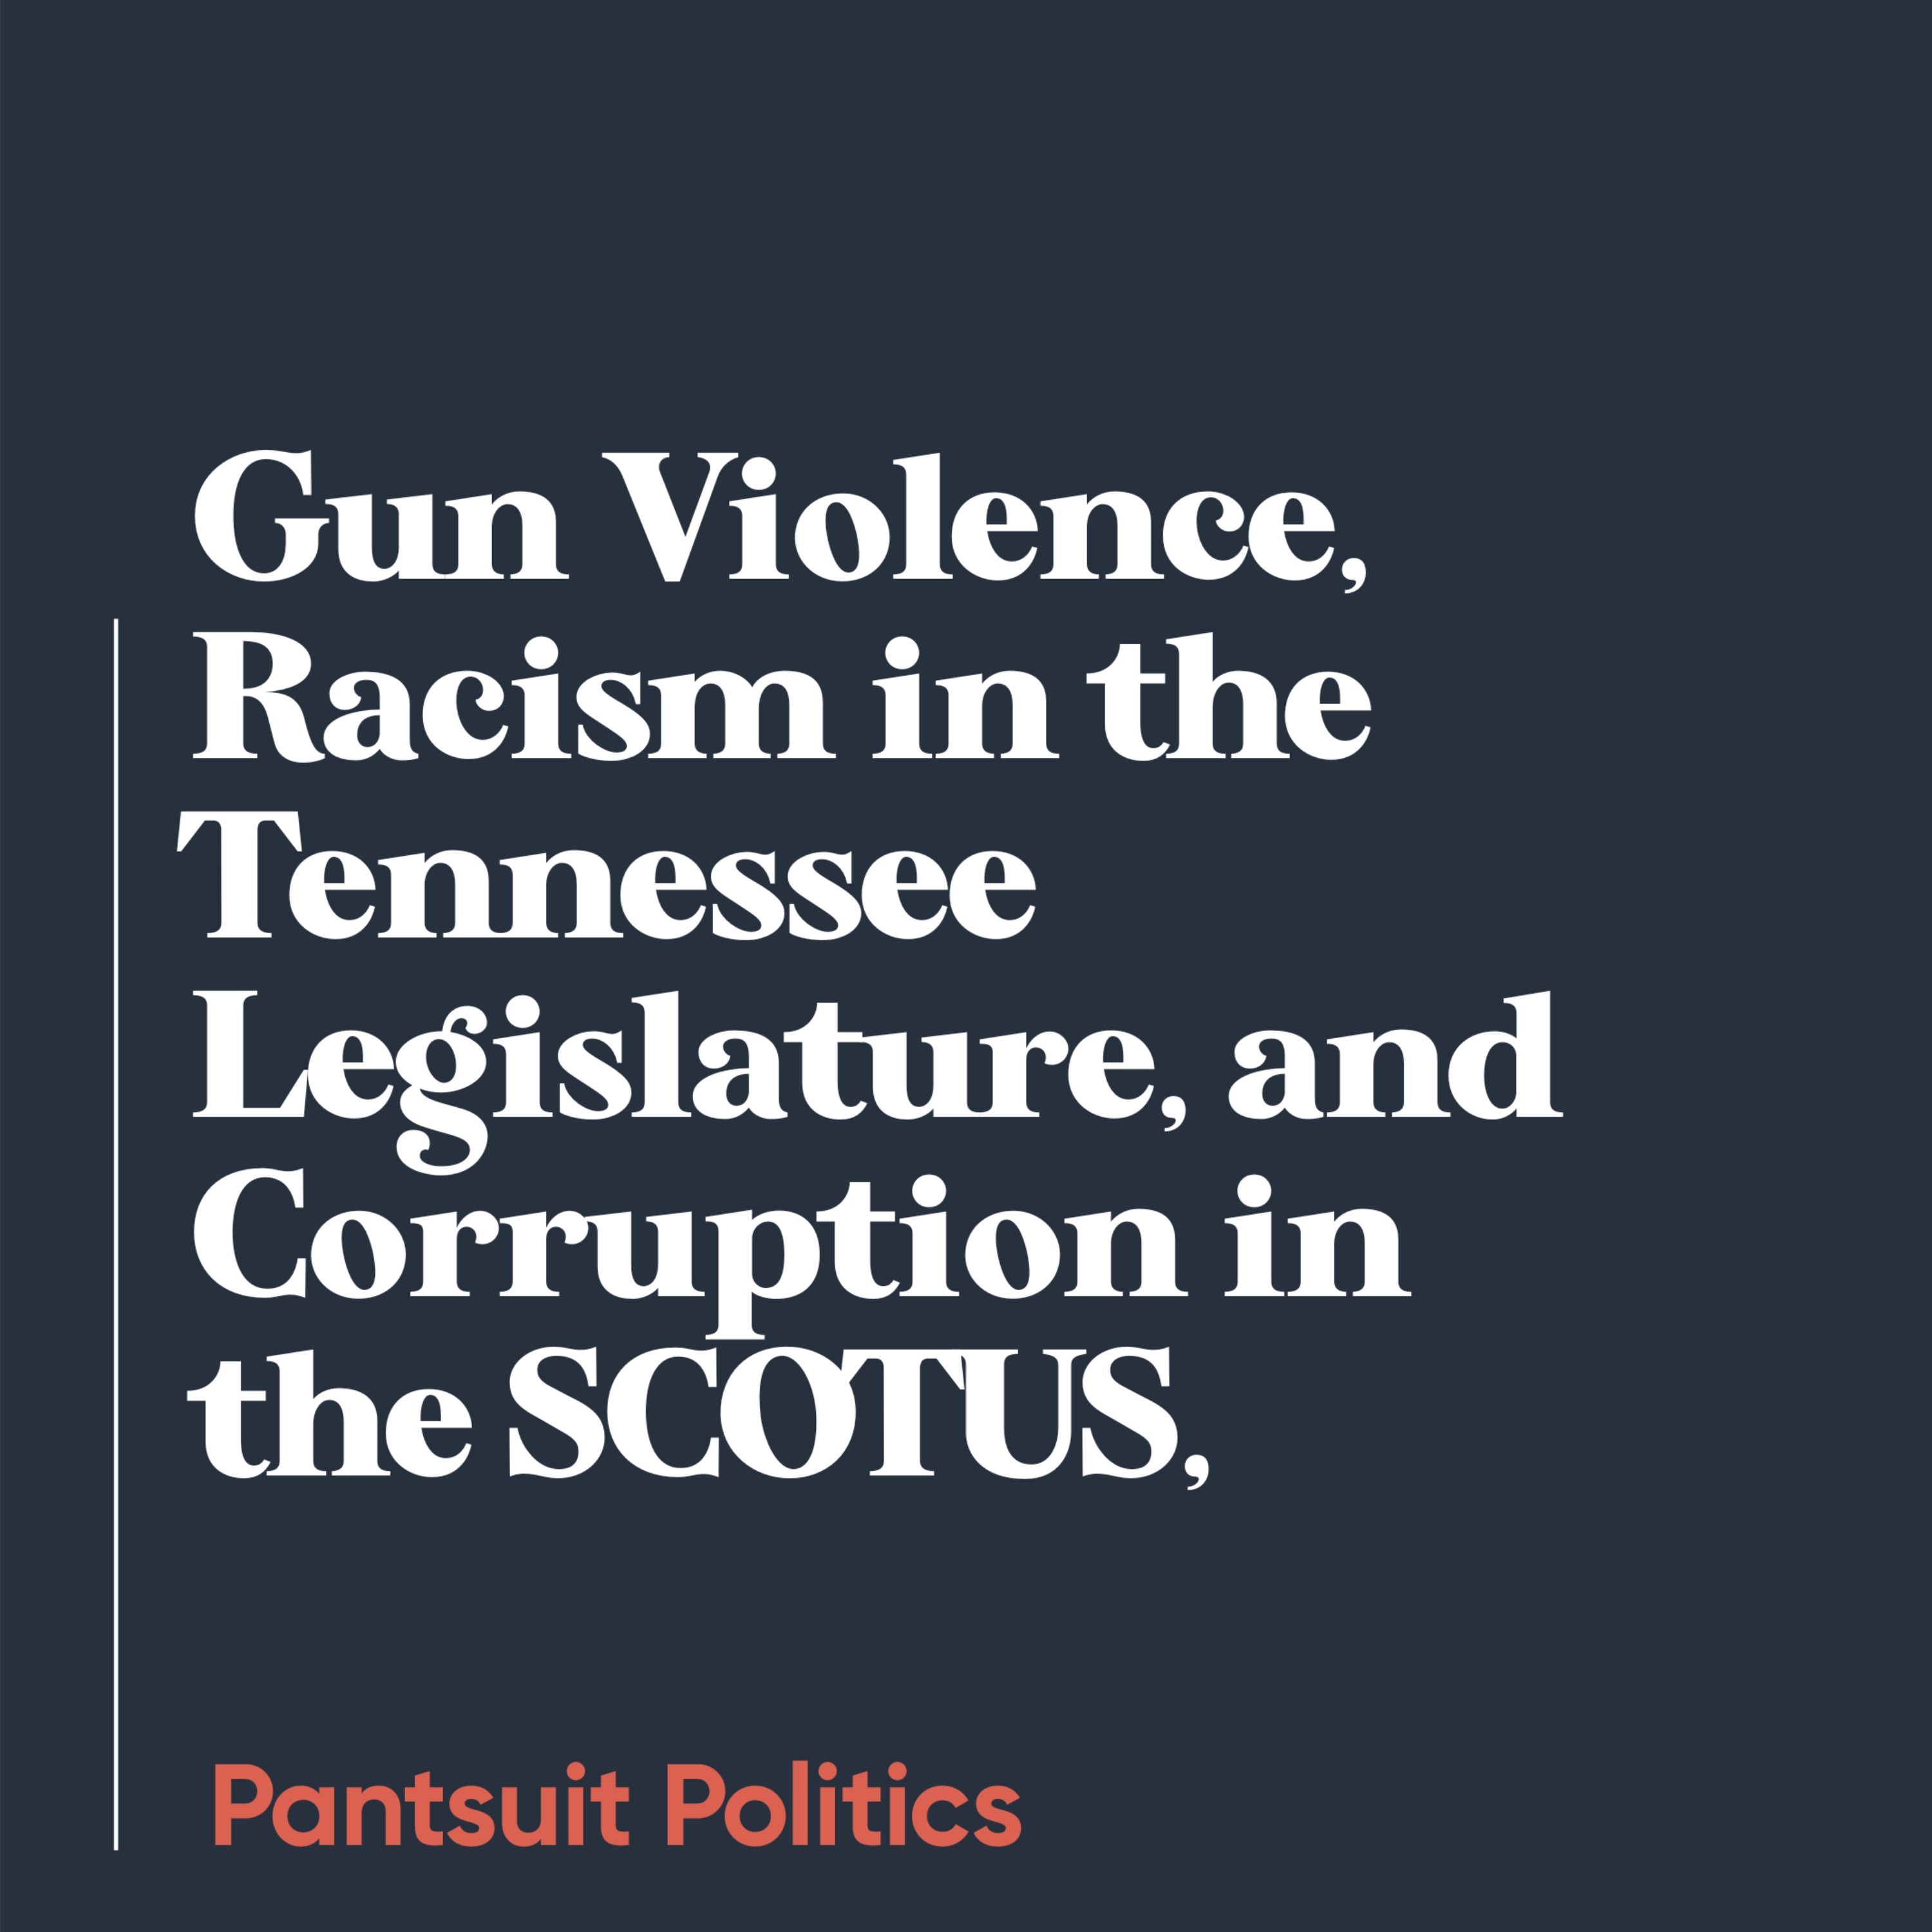 Gun Violence, Racism in the Tennessee Legislature, and Corruption in the SCOTUS